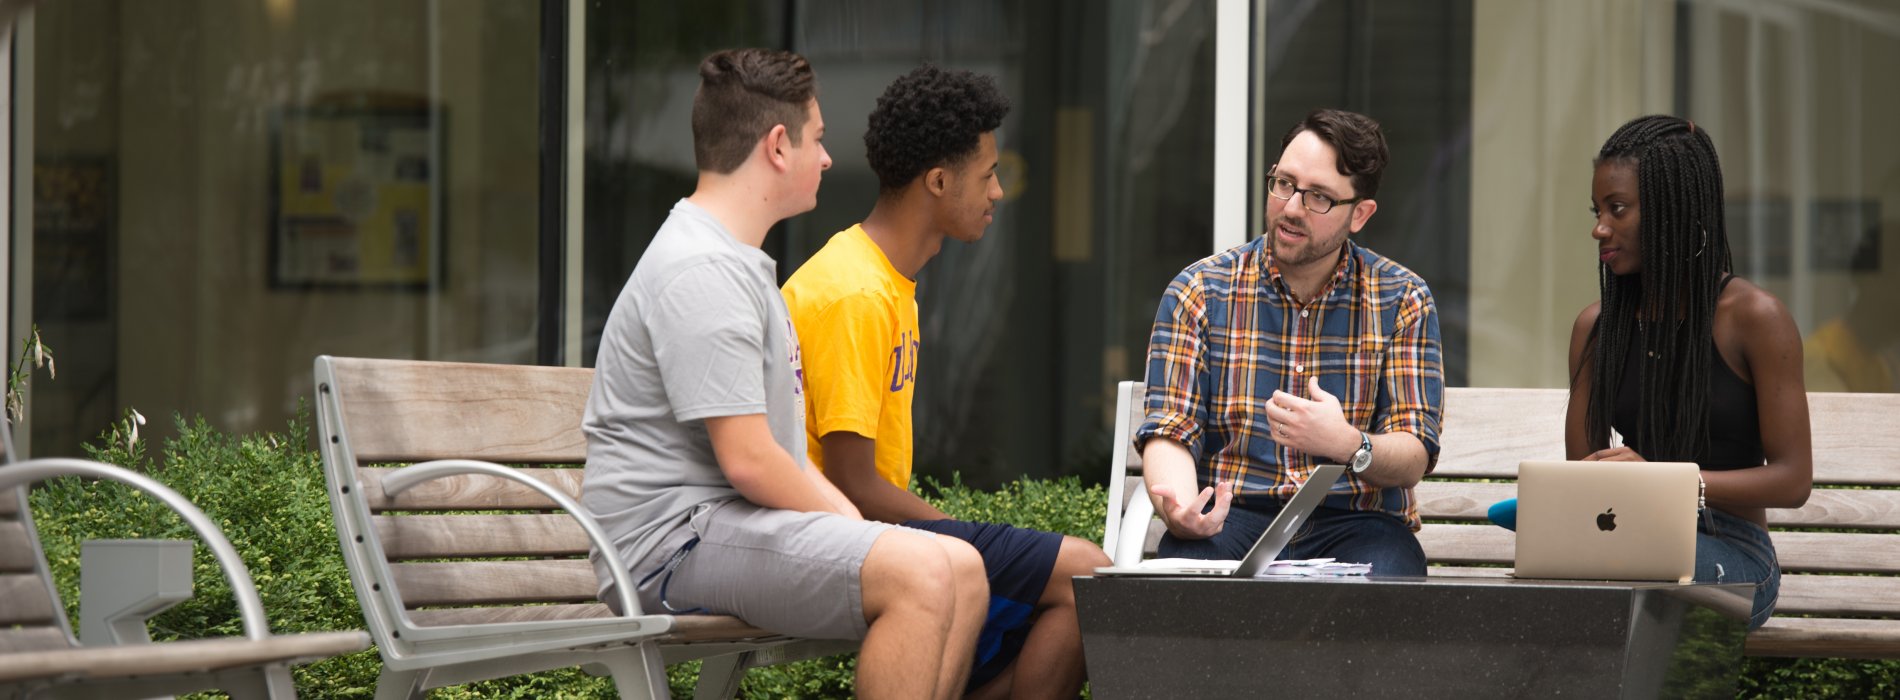 Faculty instructing students in outdoor campus area